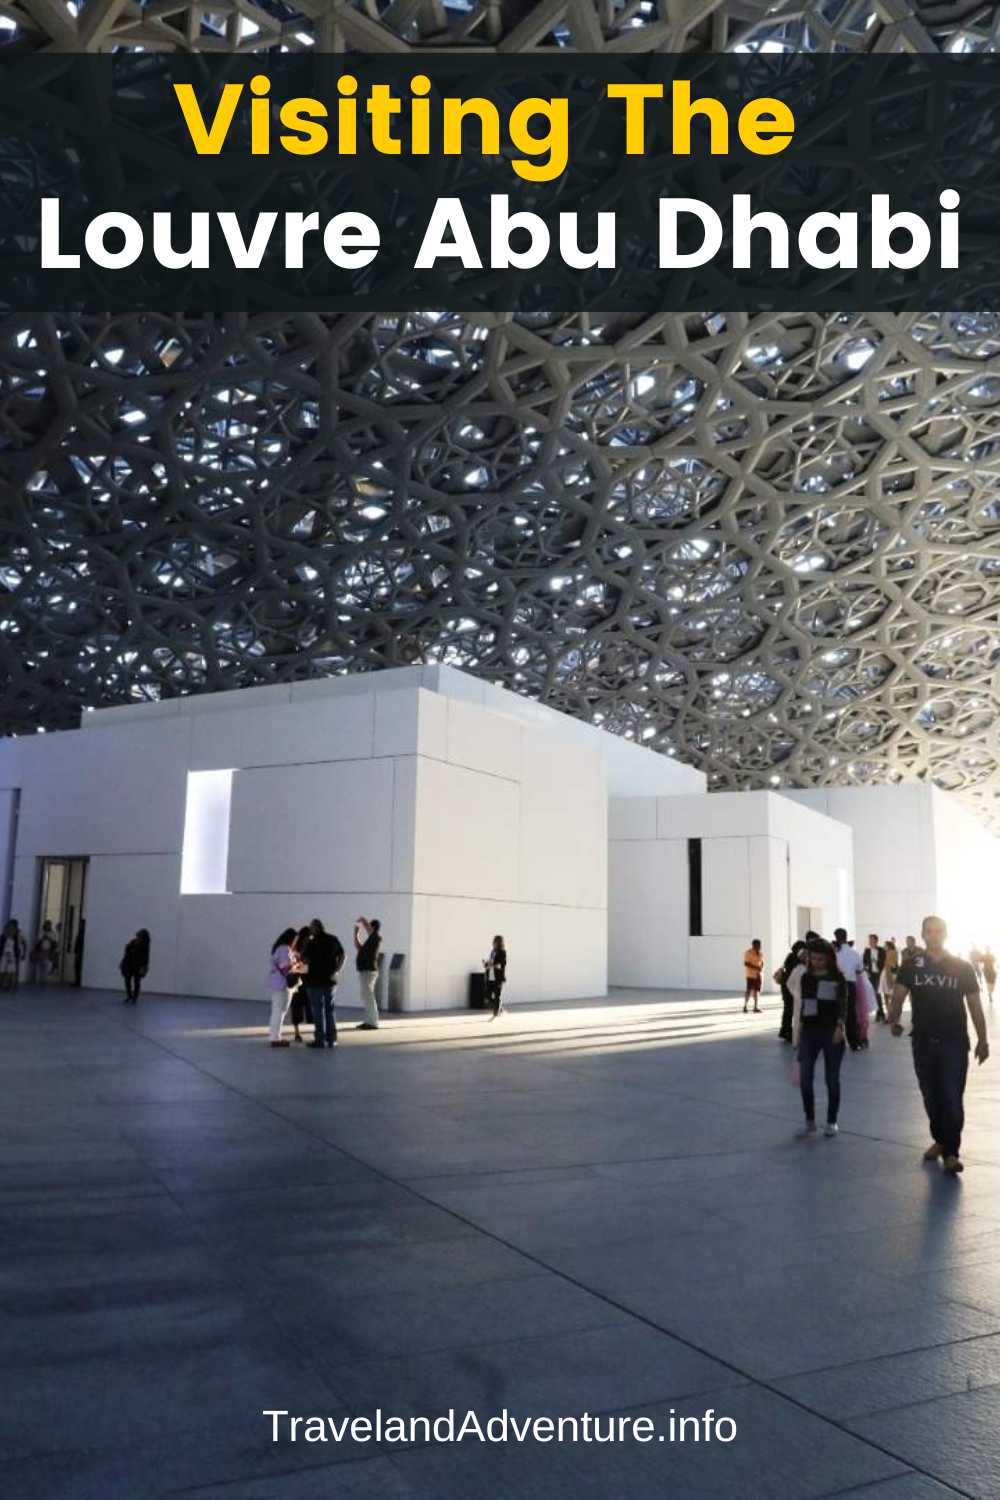 Visiting The Louvre Abu Dhabi A New Era in Art and Museums